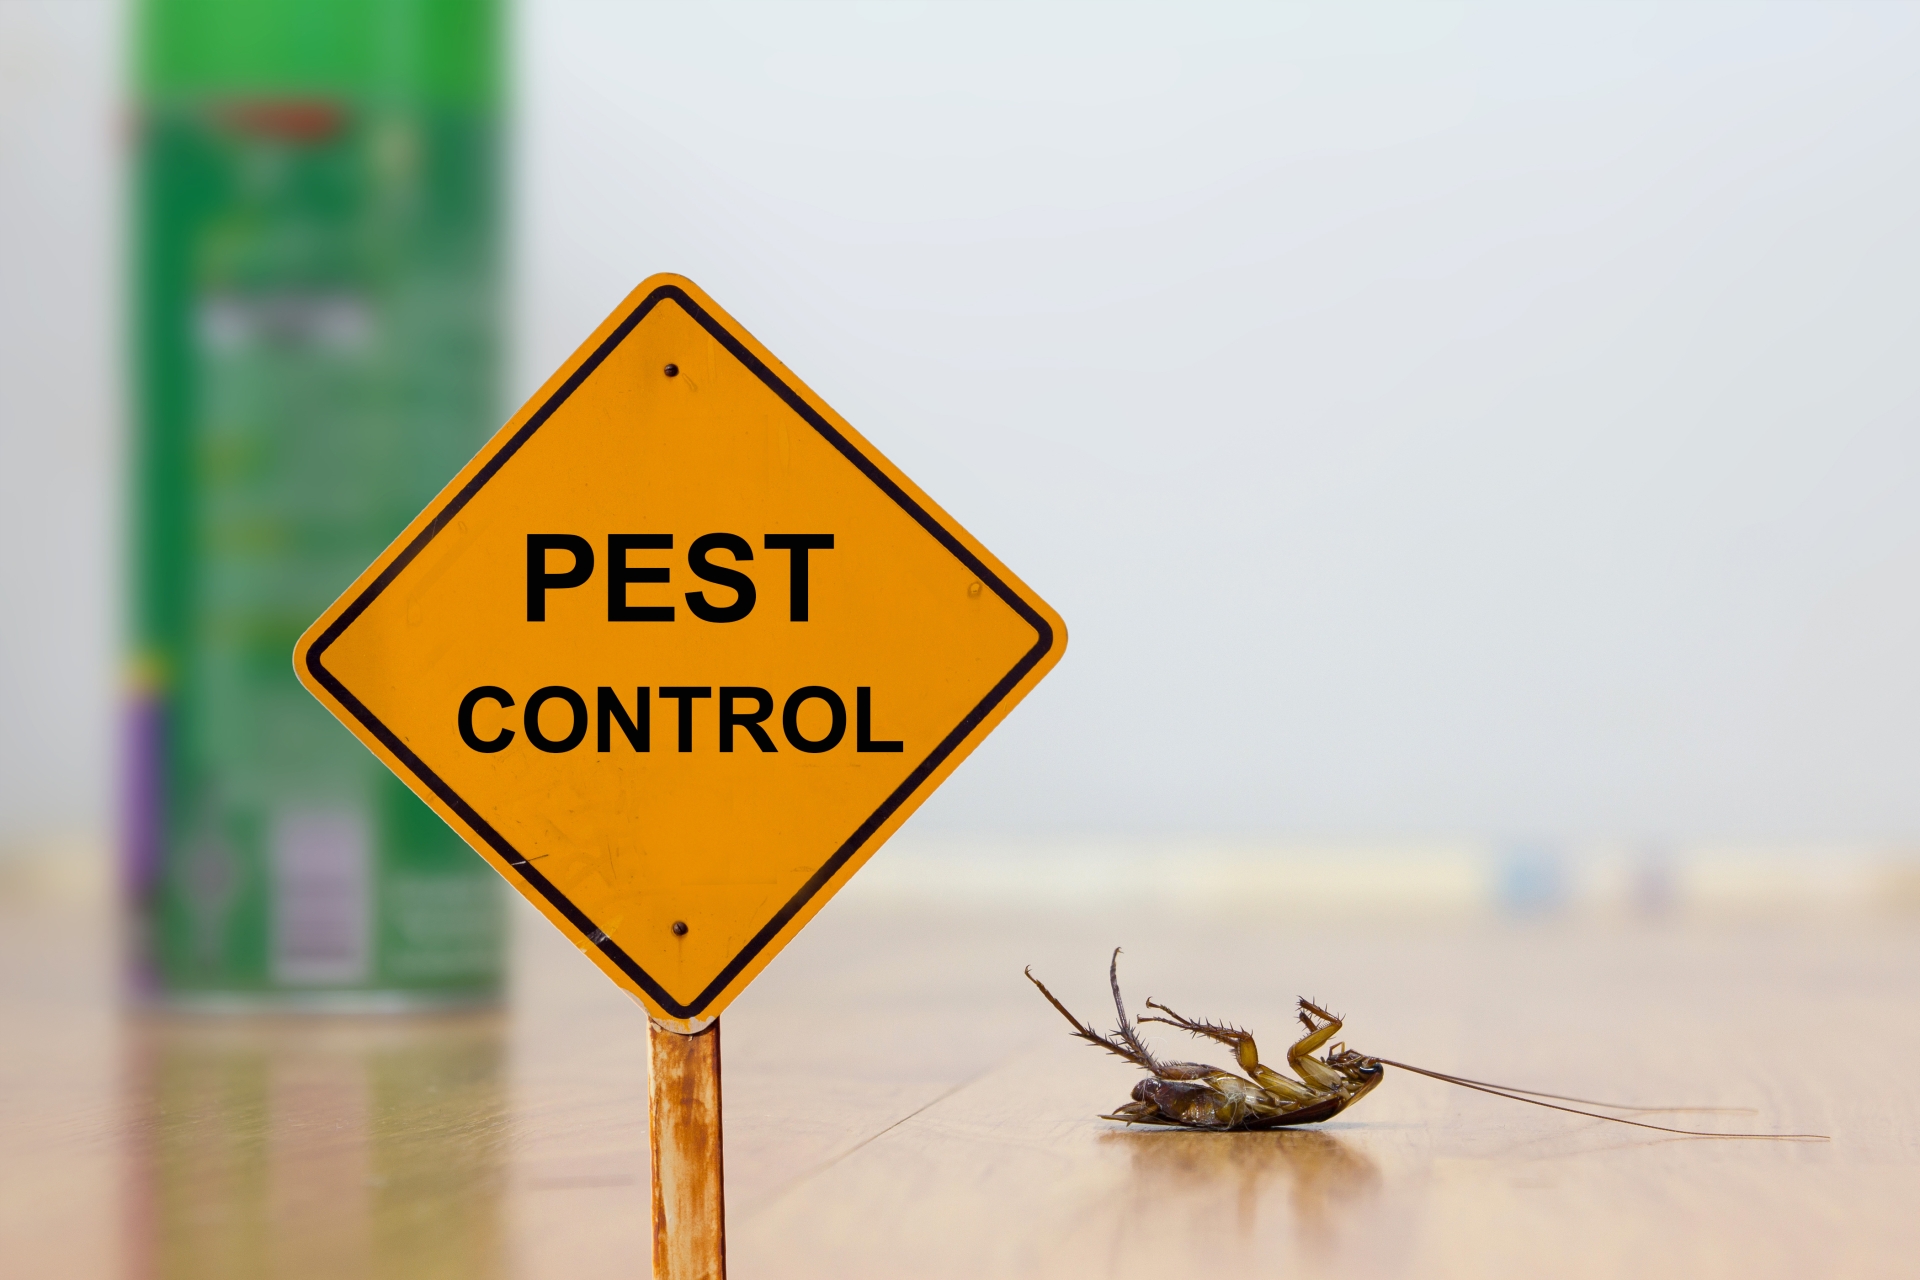 24 Hour Pest Control, Pest Control in Rotherhithe, South Bermondsey, Surrey Docks, SE16. Call Now 020 8166 9746